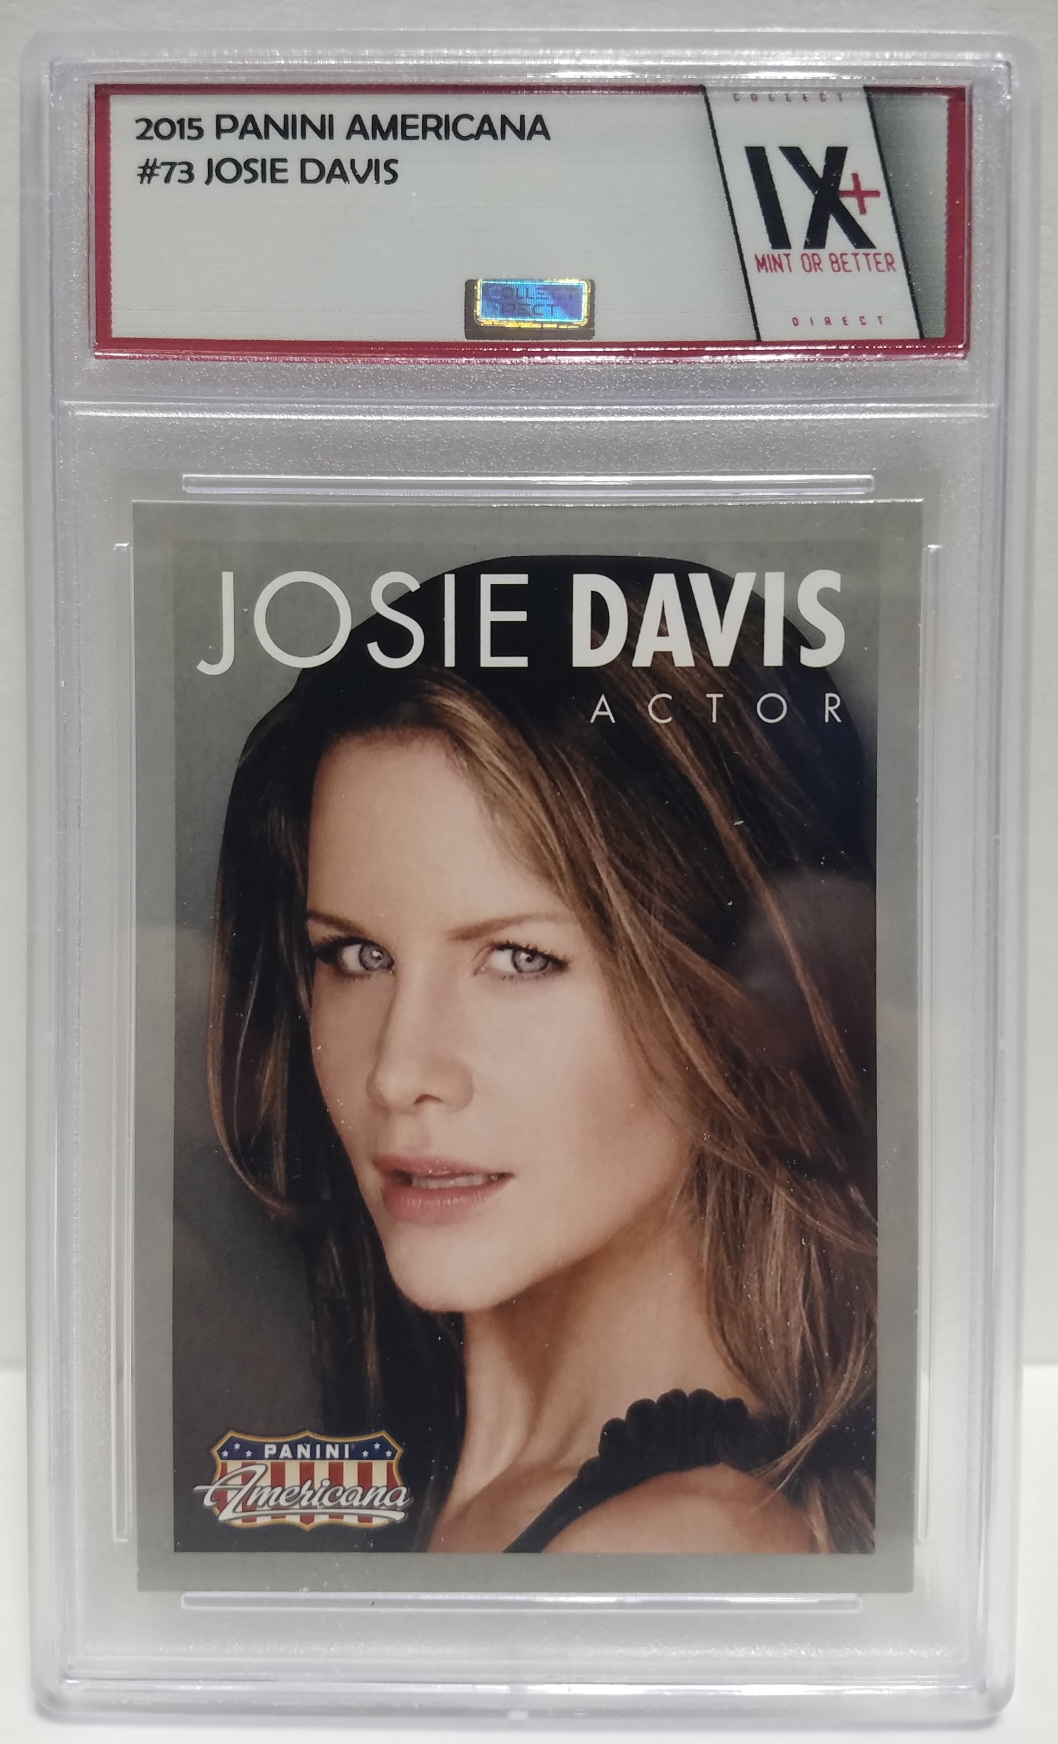 JOSIE DAVIS 2015 Panini Americana #73 Collect Direct Graded Mint or Better Actor Beverly Hills 90210